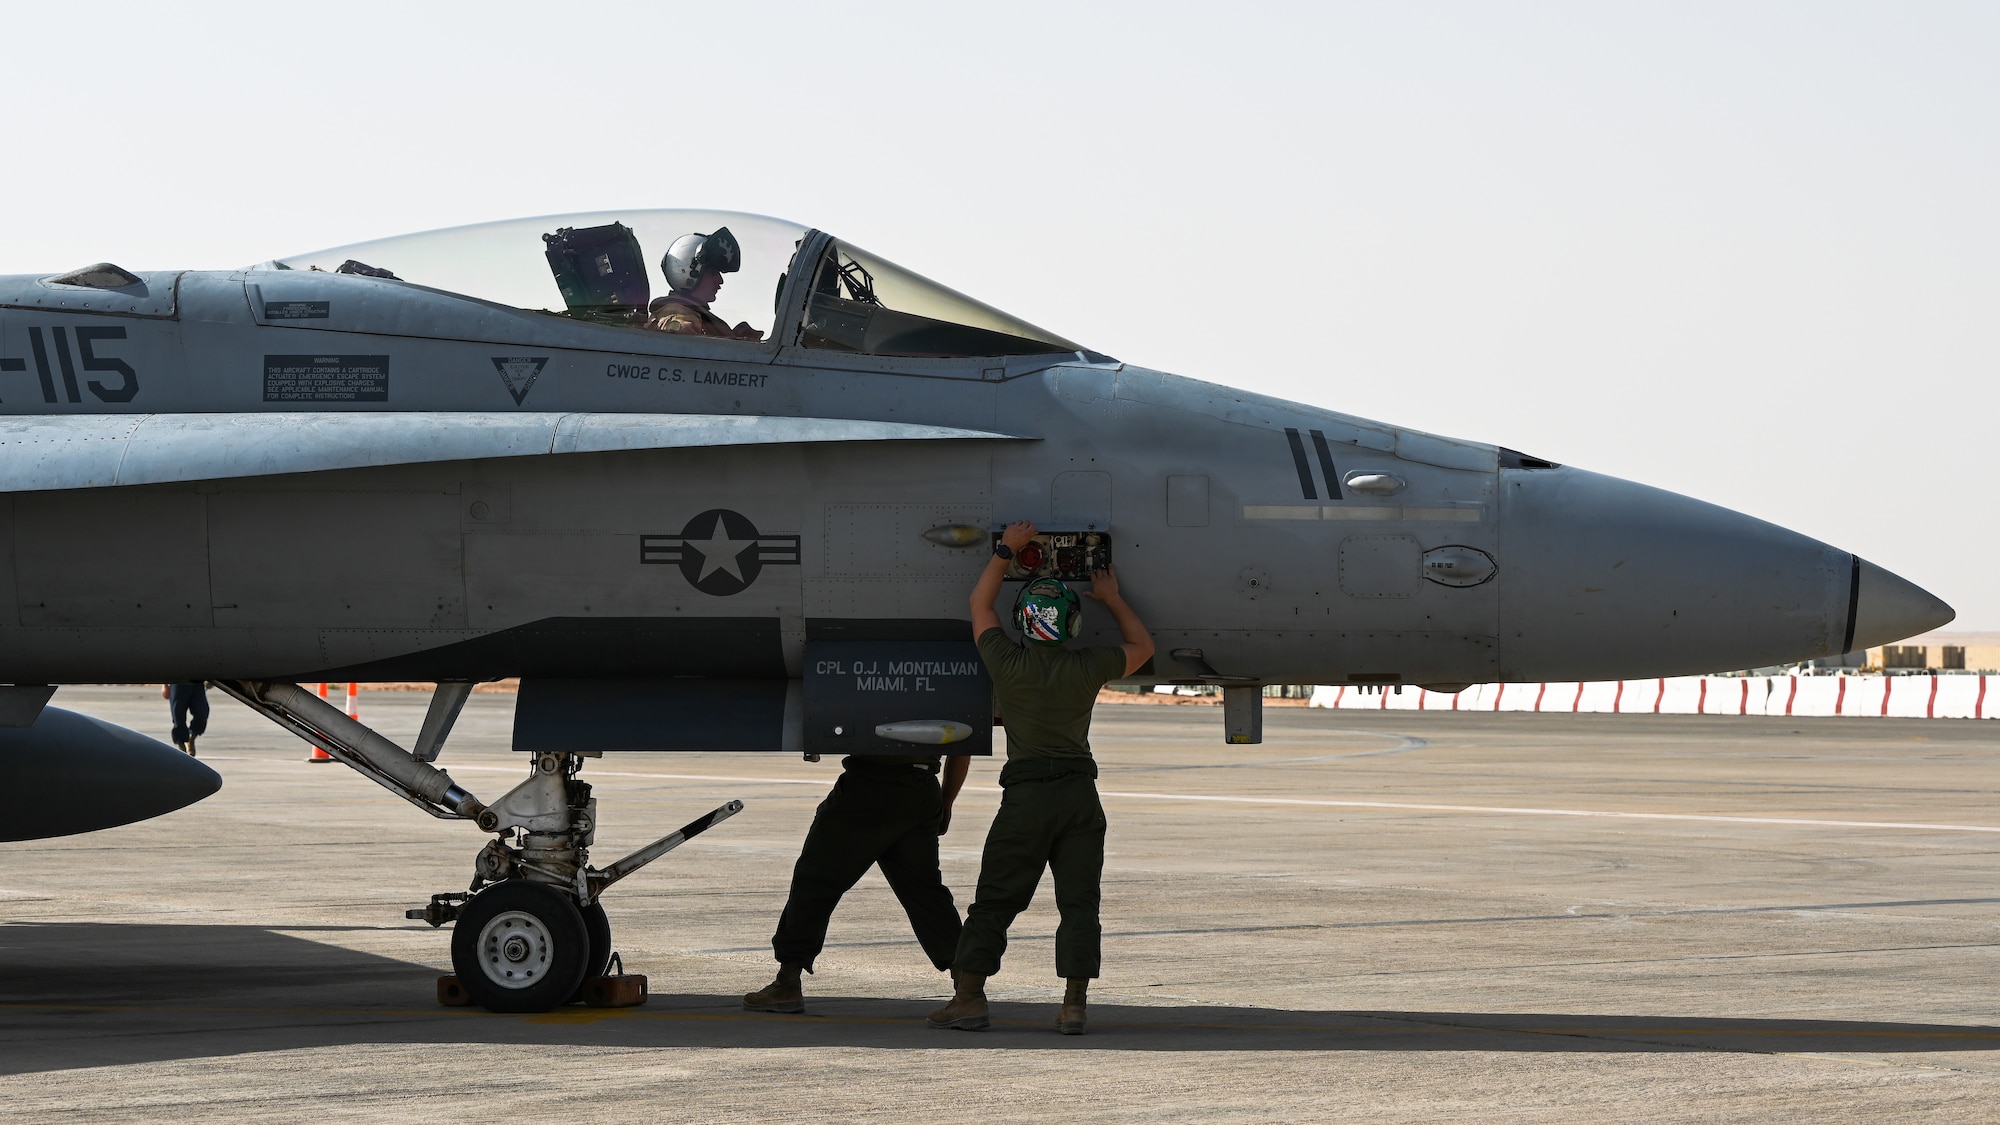 U.S. Marines from Marine Fighter Attack Squadron 115 perform inspections on an F/A-18 Hornet at Prince Sultan Air Base, Kingdom of Saudi Arabia, Jan. 25, 2022. The VMFA-115 deployed to PSAB to maximize regional capabilities in regards to mutual security concerns. (U.S. Air Force photo by Staff Sgt. Christina A. Graves)